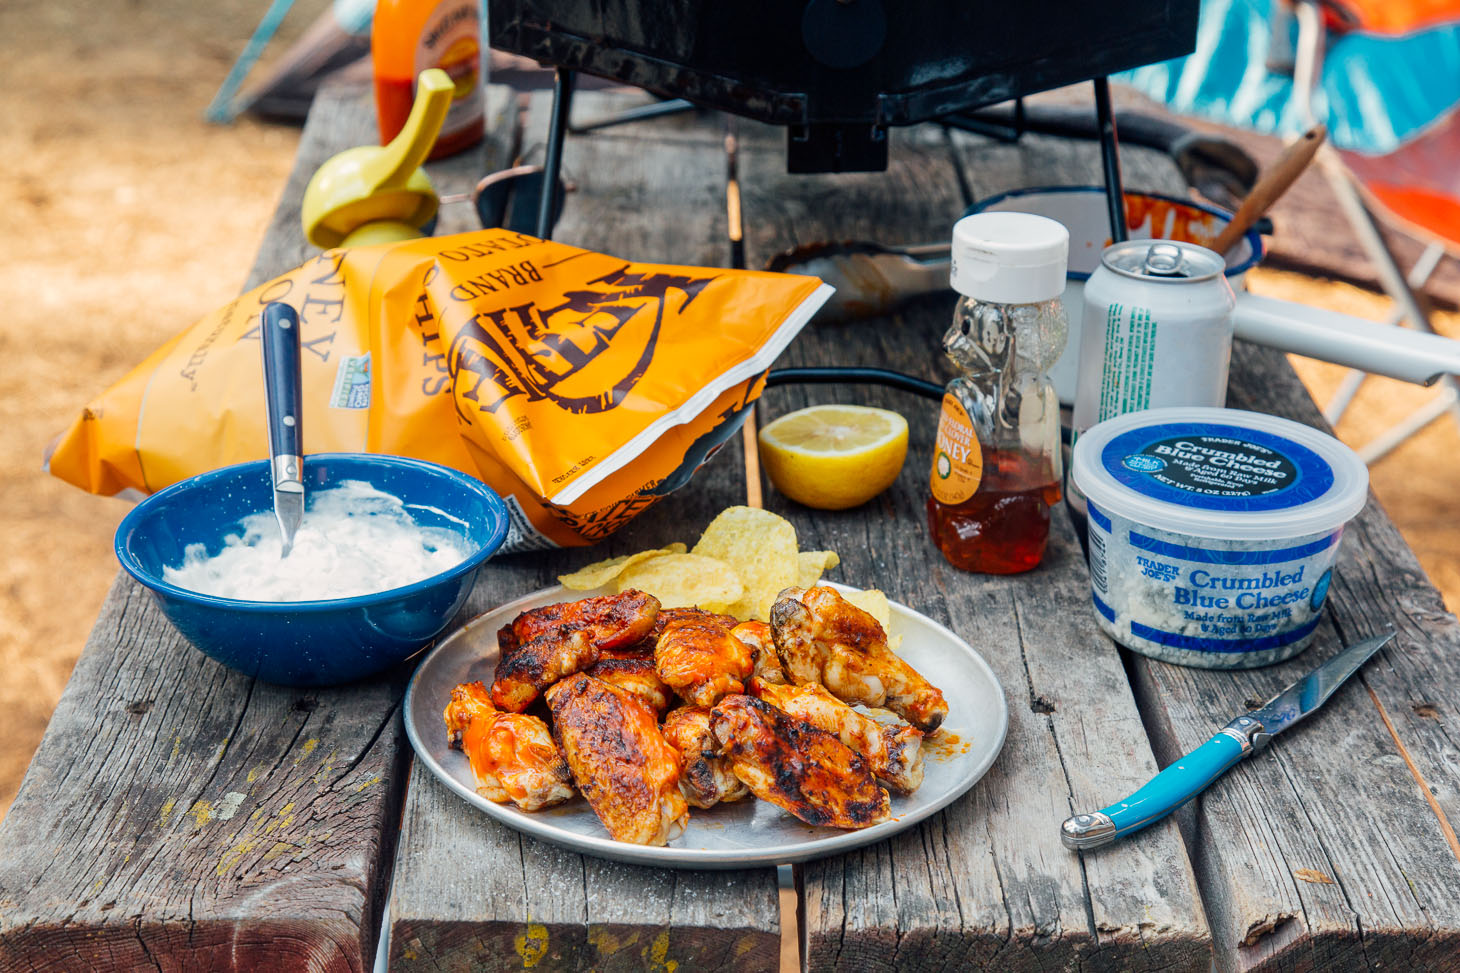 A camp table scene with a plate of grilled buffalo wings